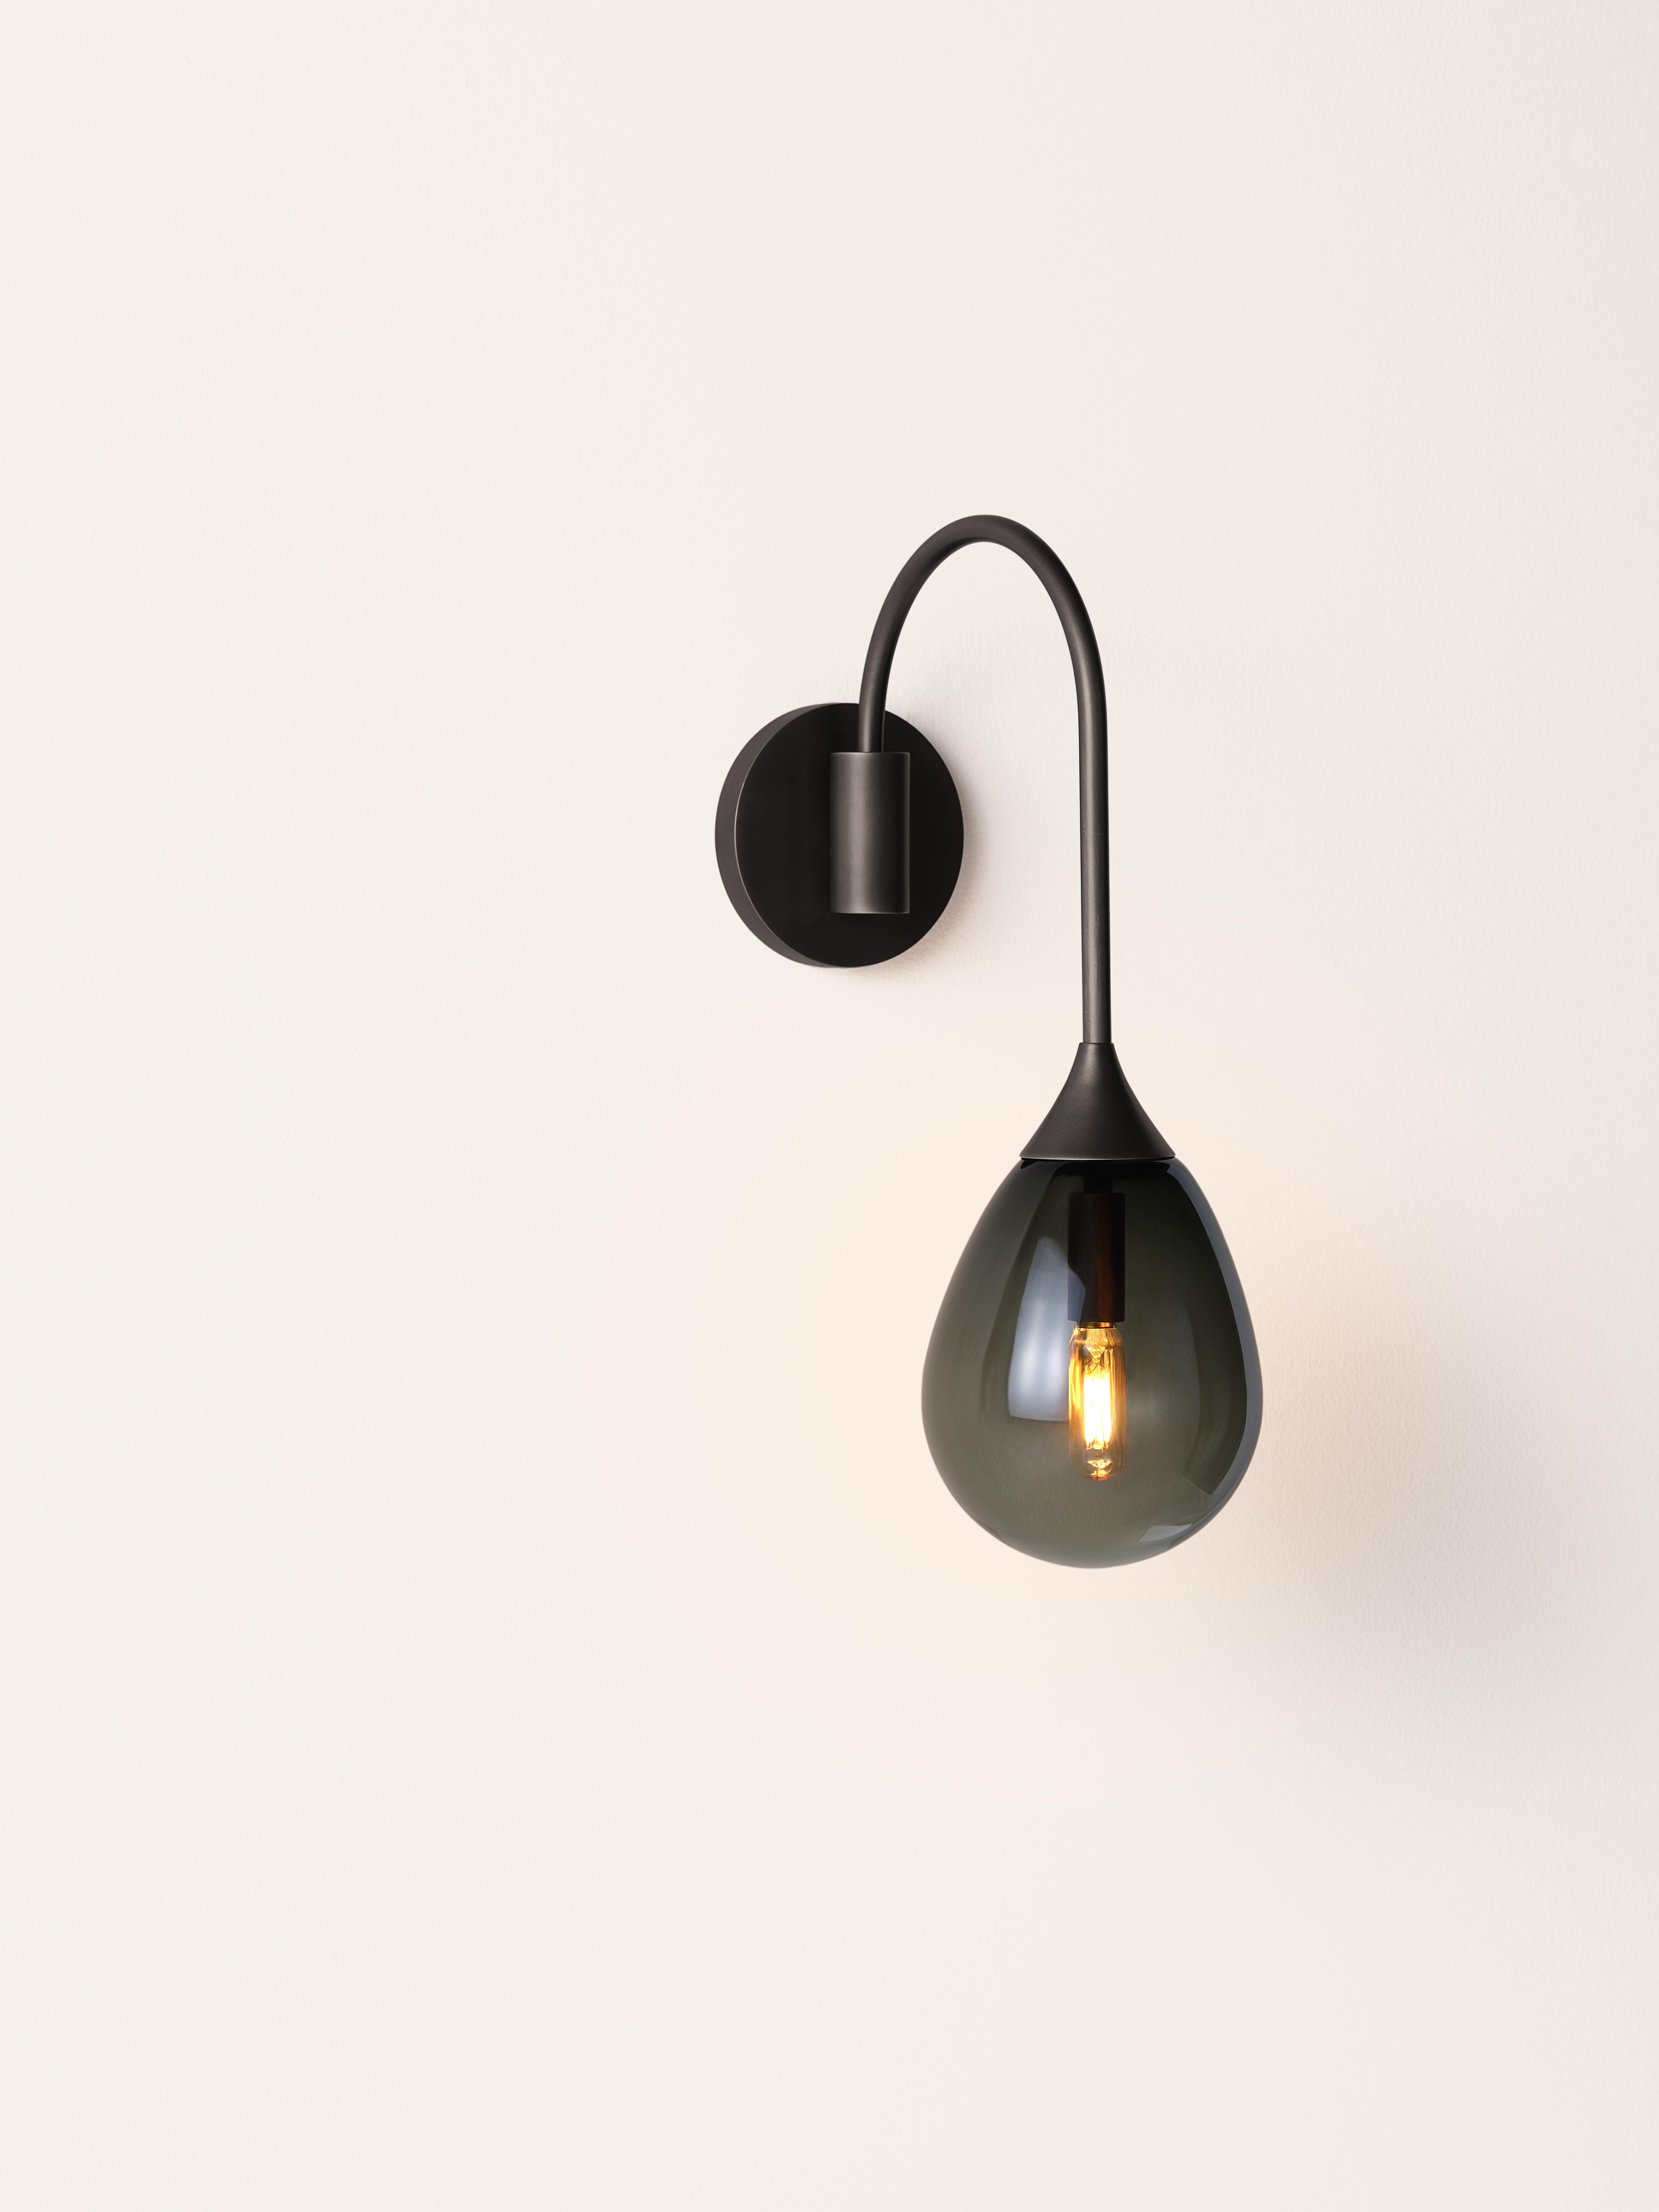 A carefully crafted, hand-blown glass pendant hangs from spun brass for an elongated and elegant tear-drop shape. Also available as a ceiling fixture.

Metal finish:
Satin brass, oil-rubbed bronze, antique brass, satin nickel, antique nickel, or